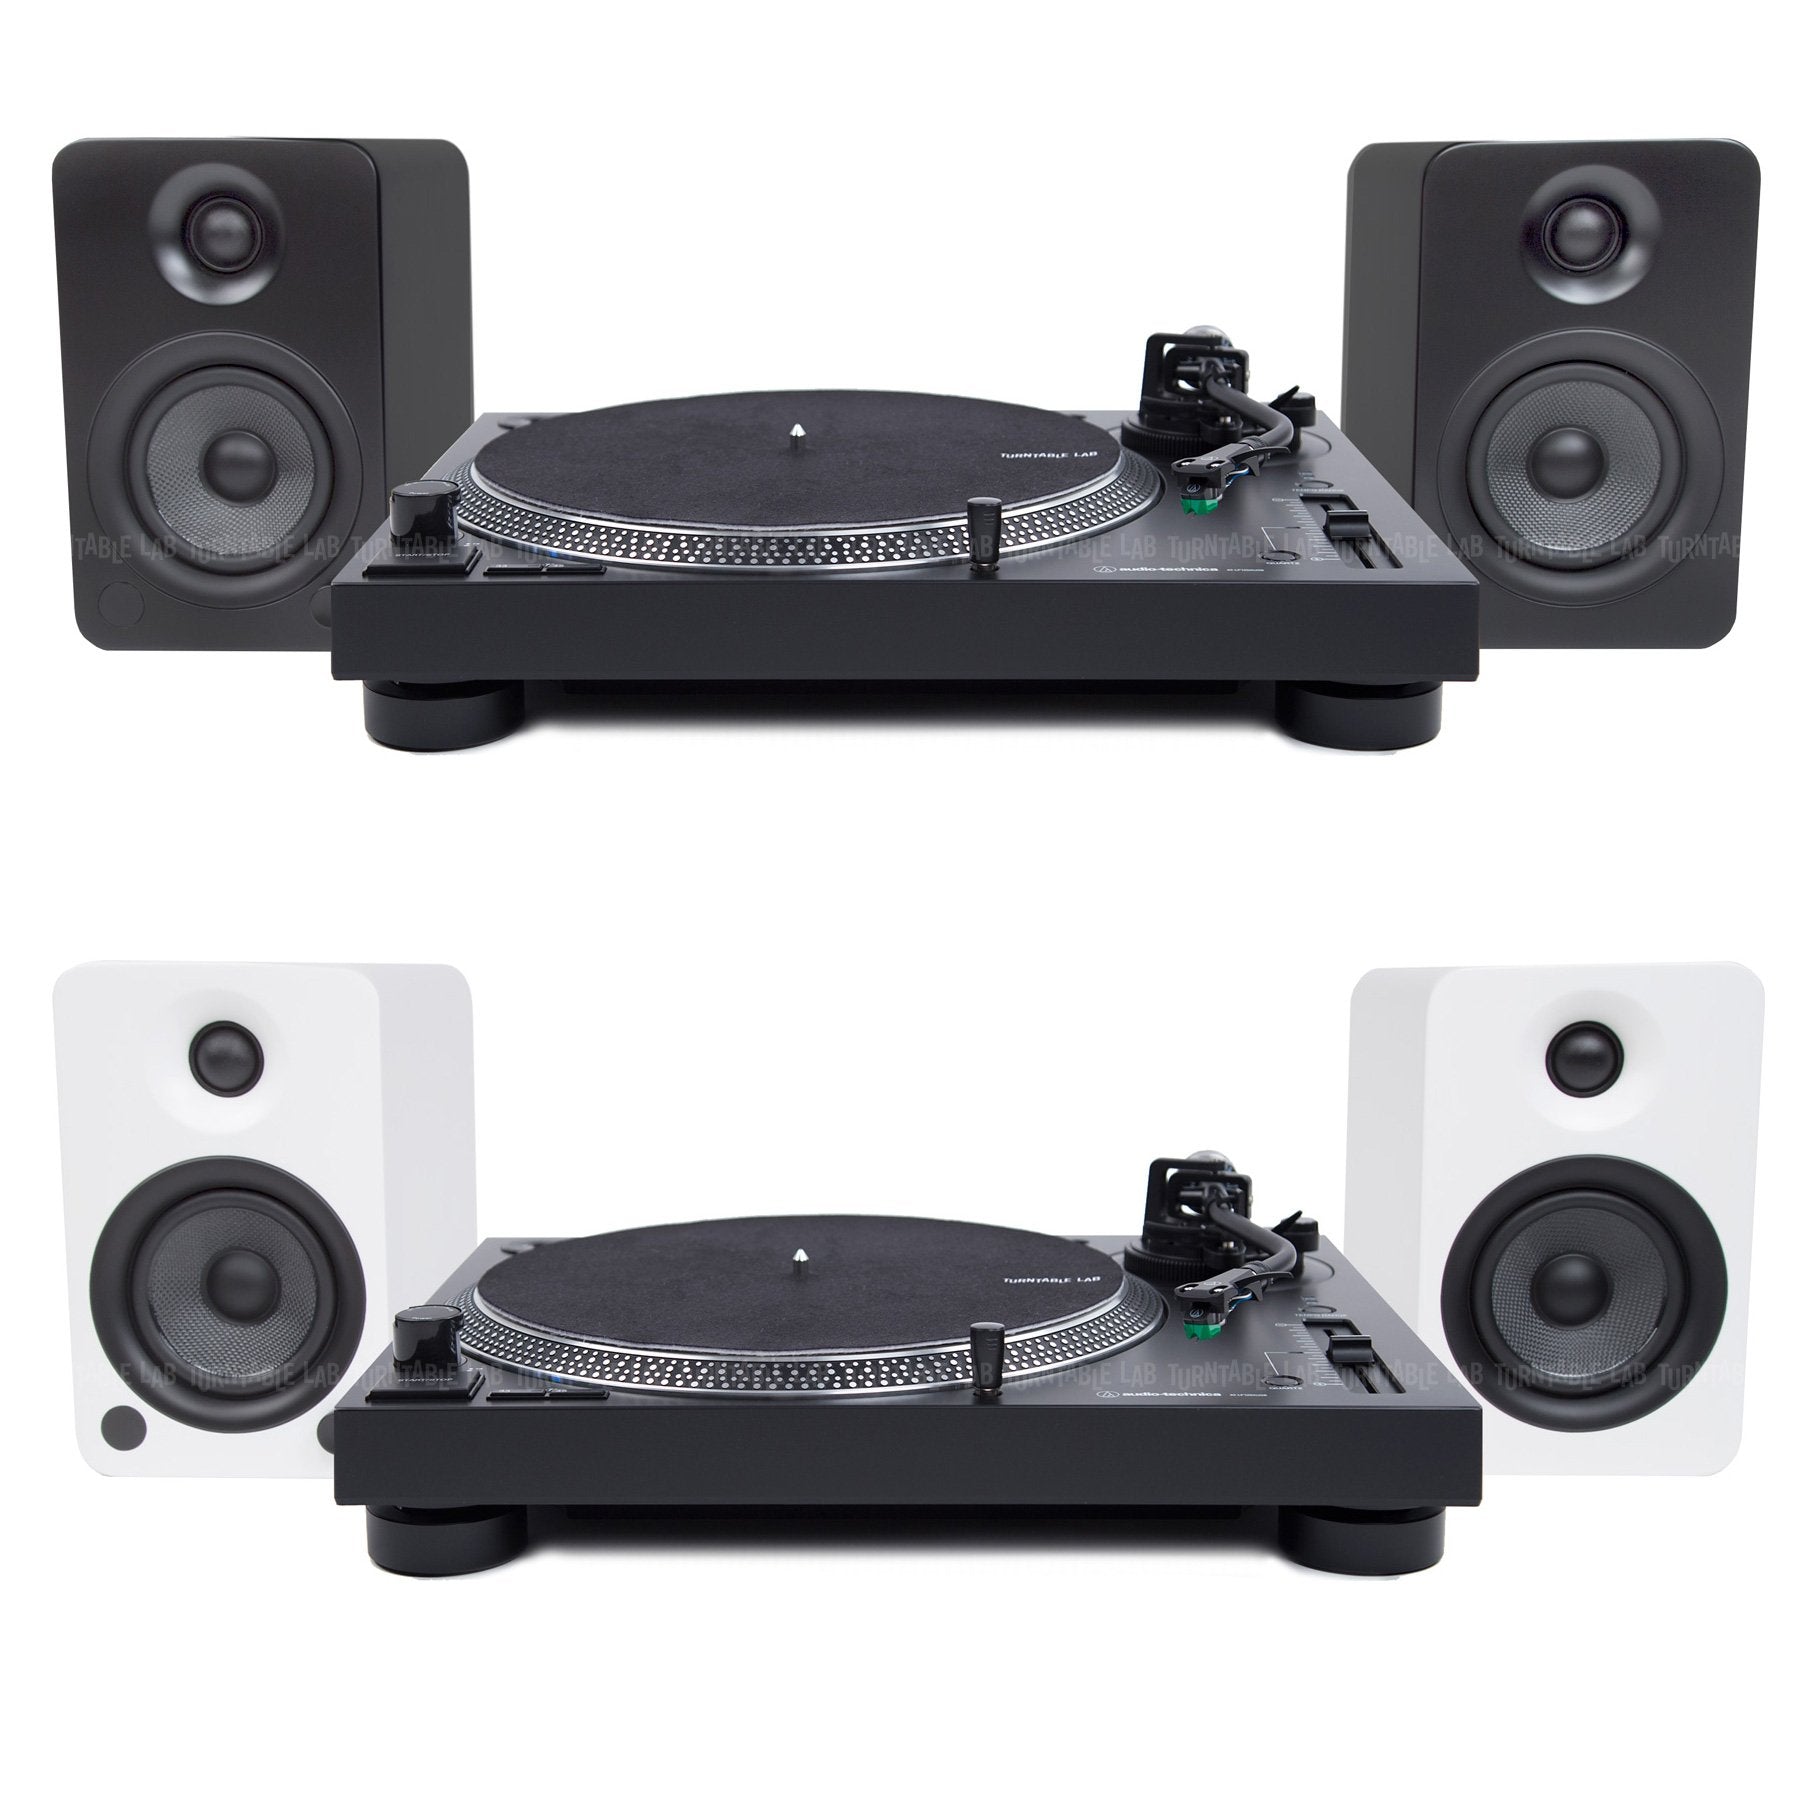 Audio-Technica: AT-LP120X / Kanto YU4 / Turntable Package